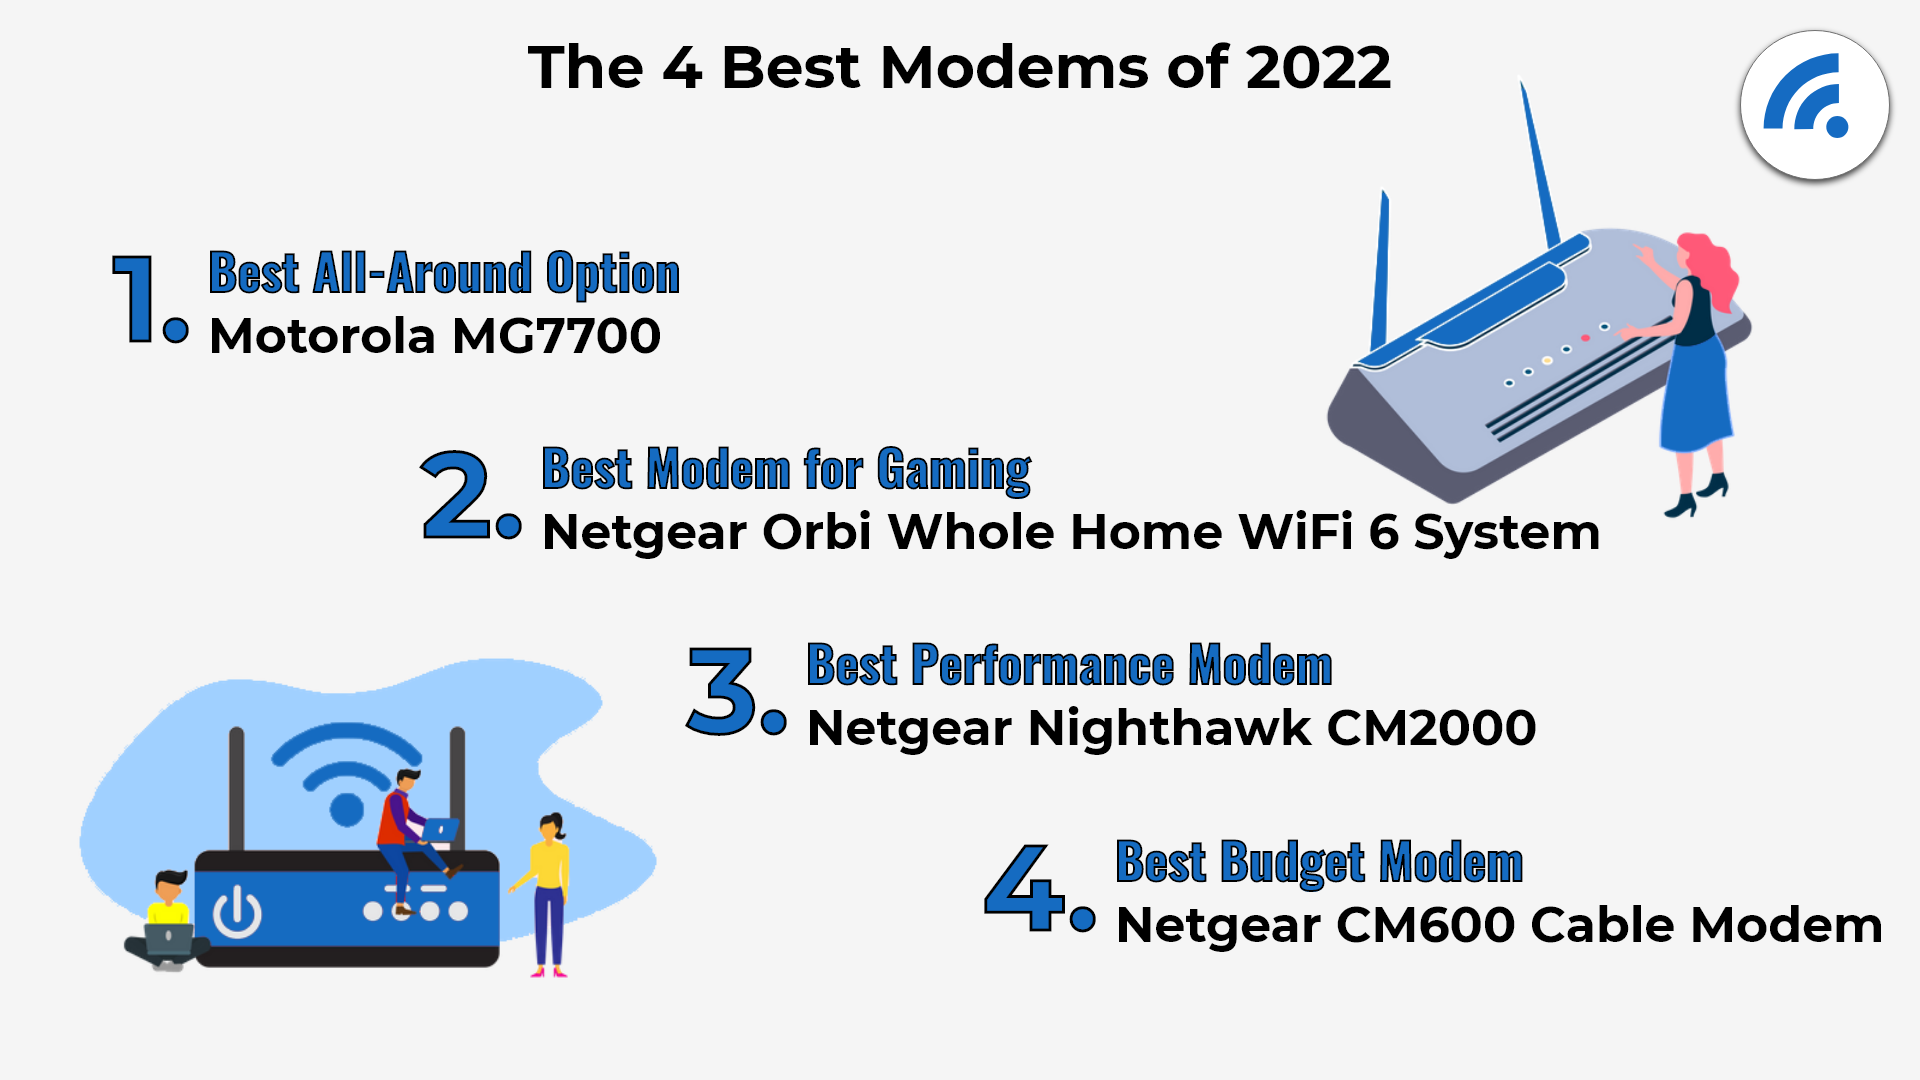 The 4 Best Modems For 2022